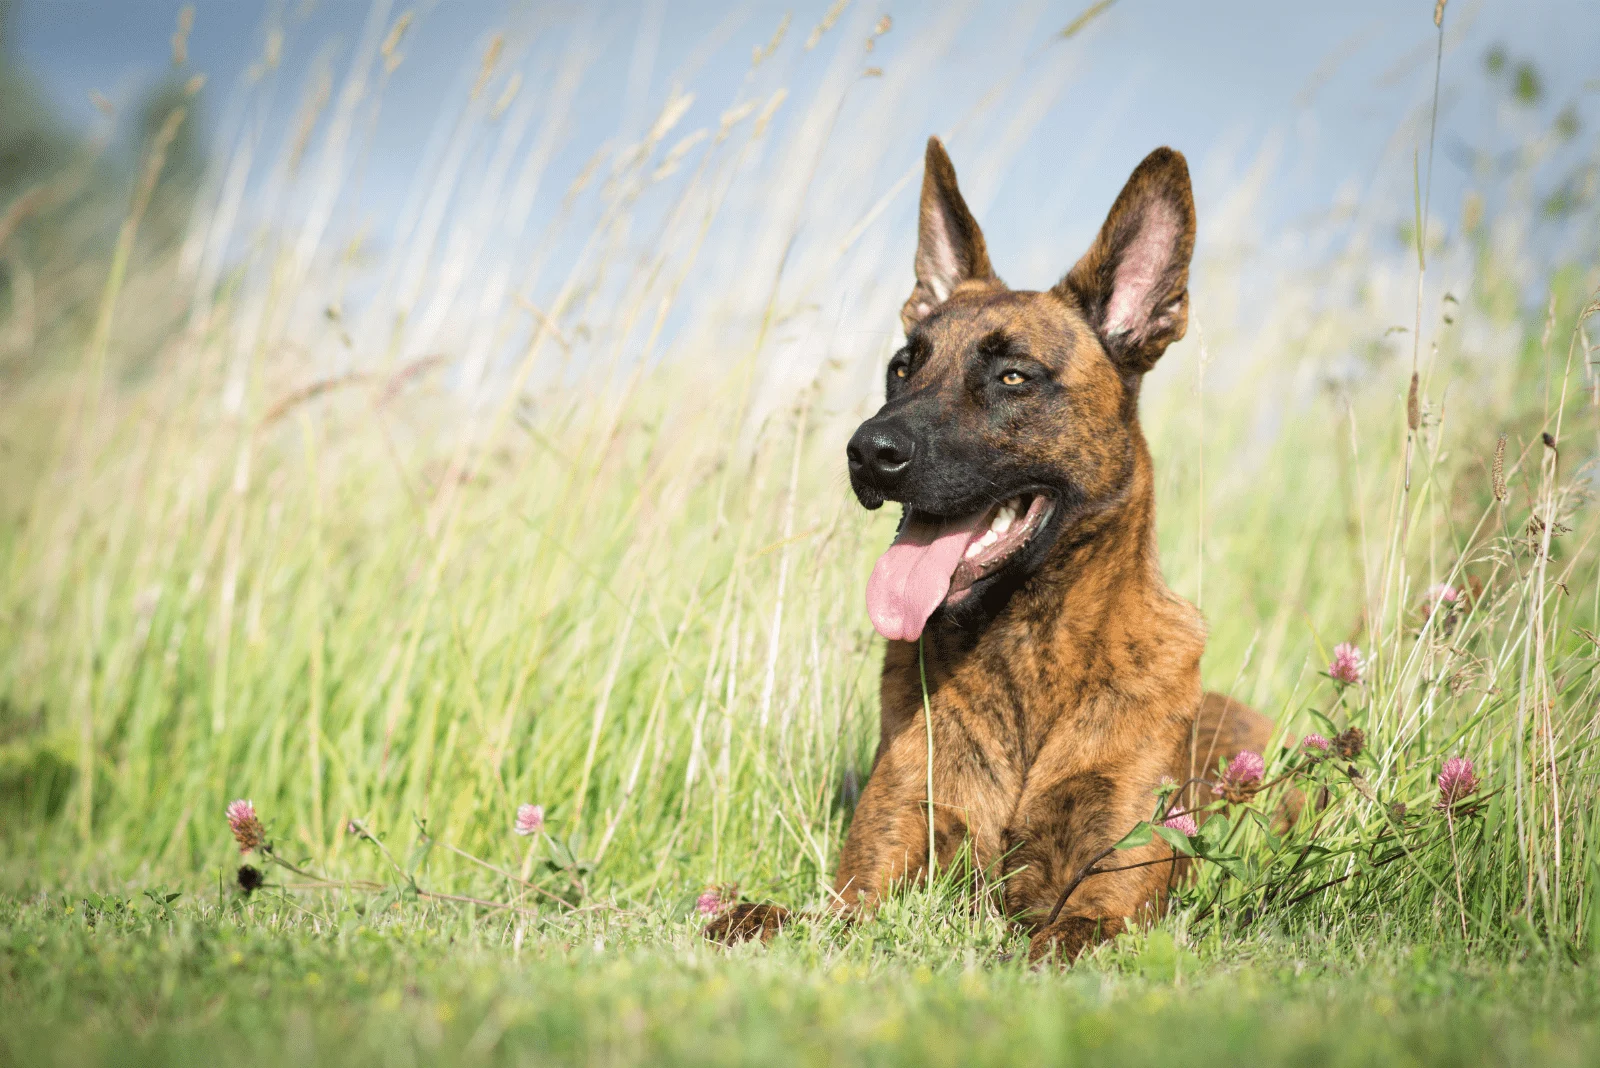 Dutch Shepherd lies in the grass with his tongue out